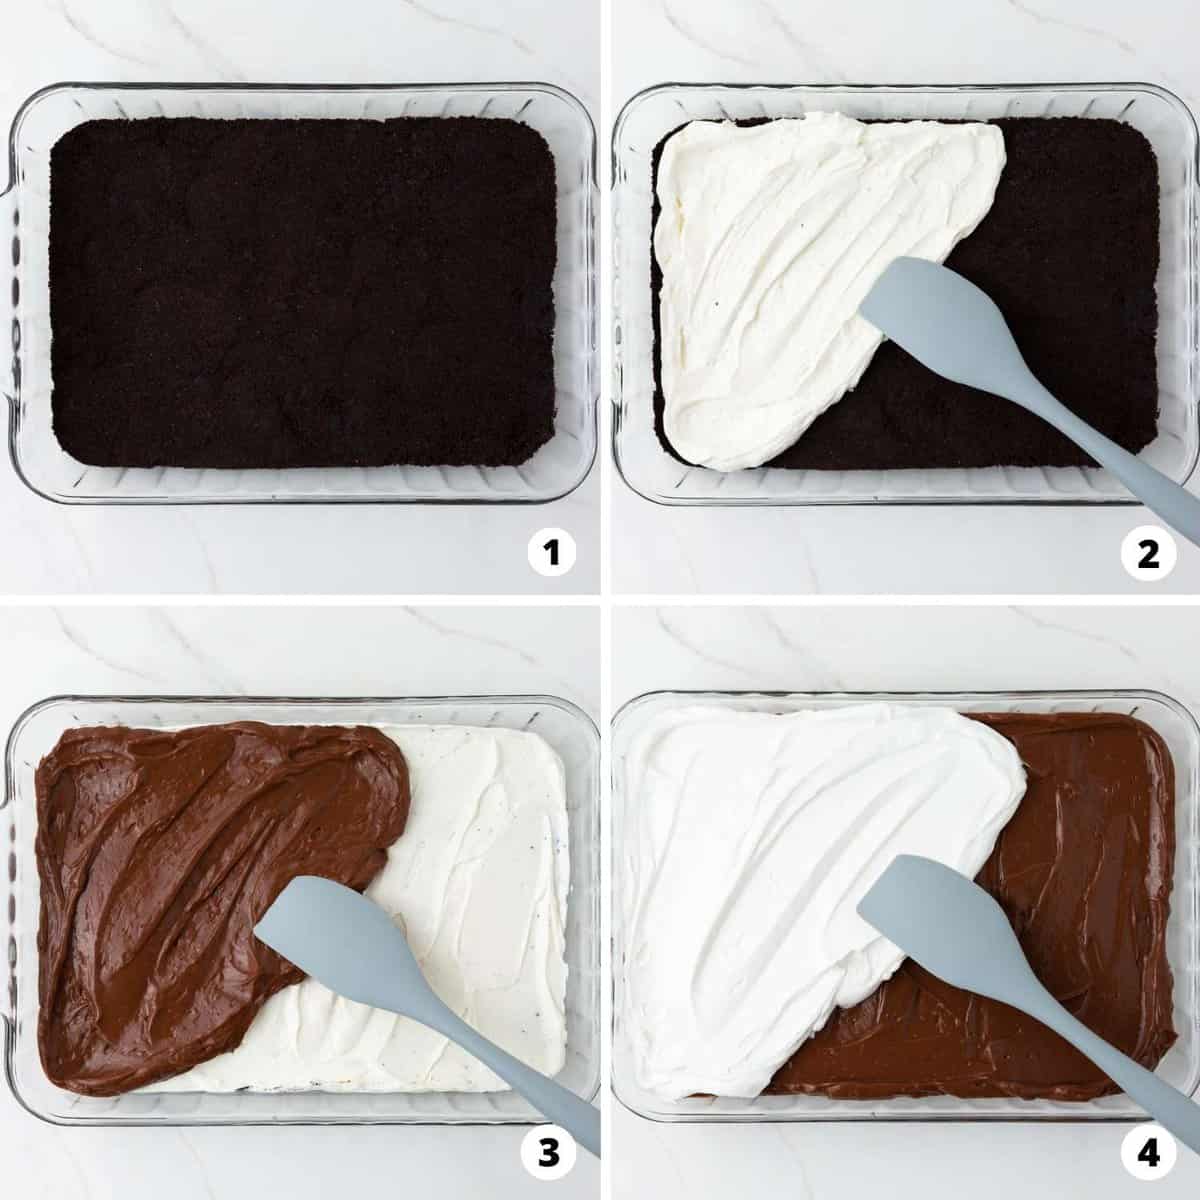 Step by step collage making chocolate lasagna.